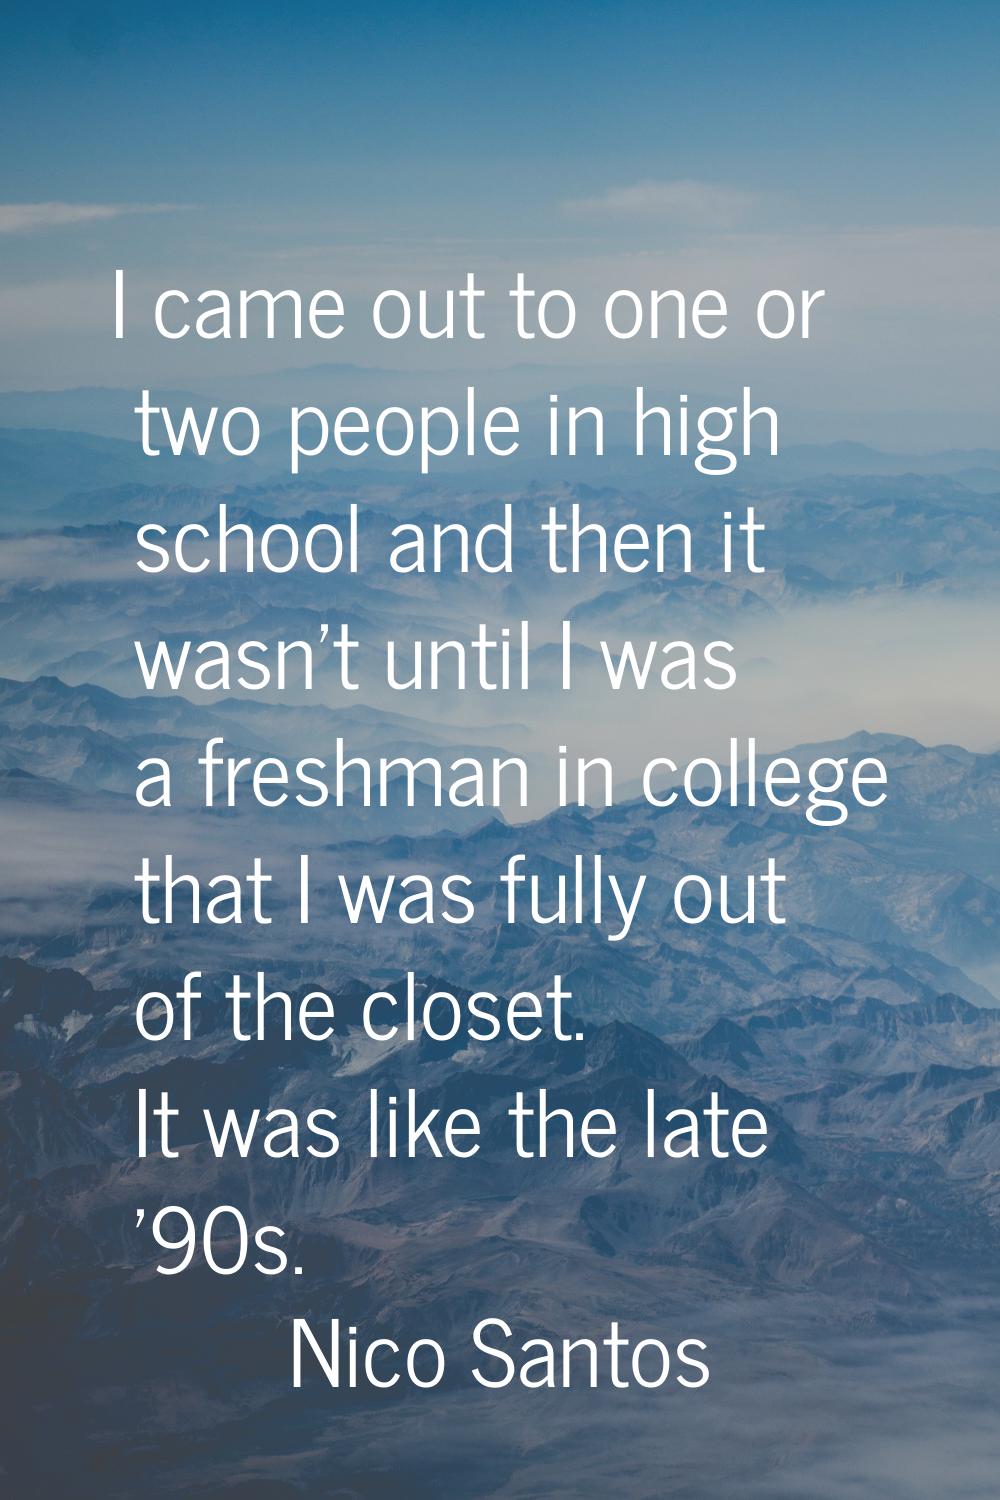 I came out to one or two people in high school and then it wasn't until I was a freshman in college